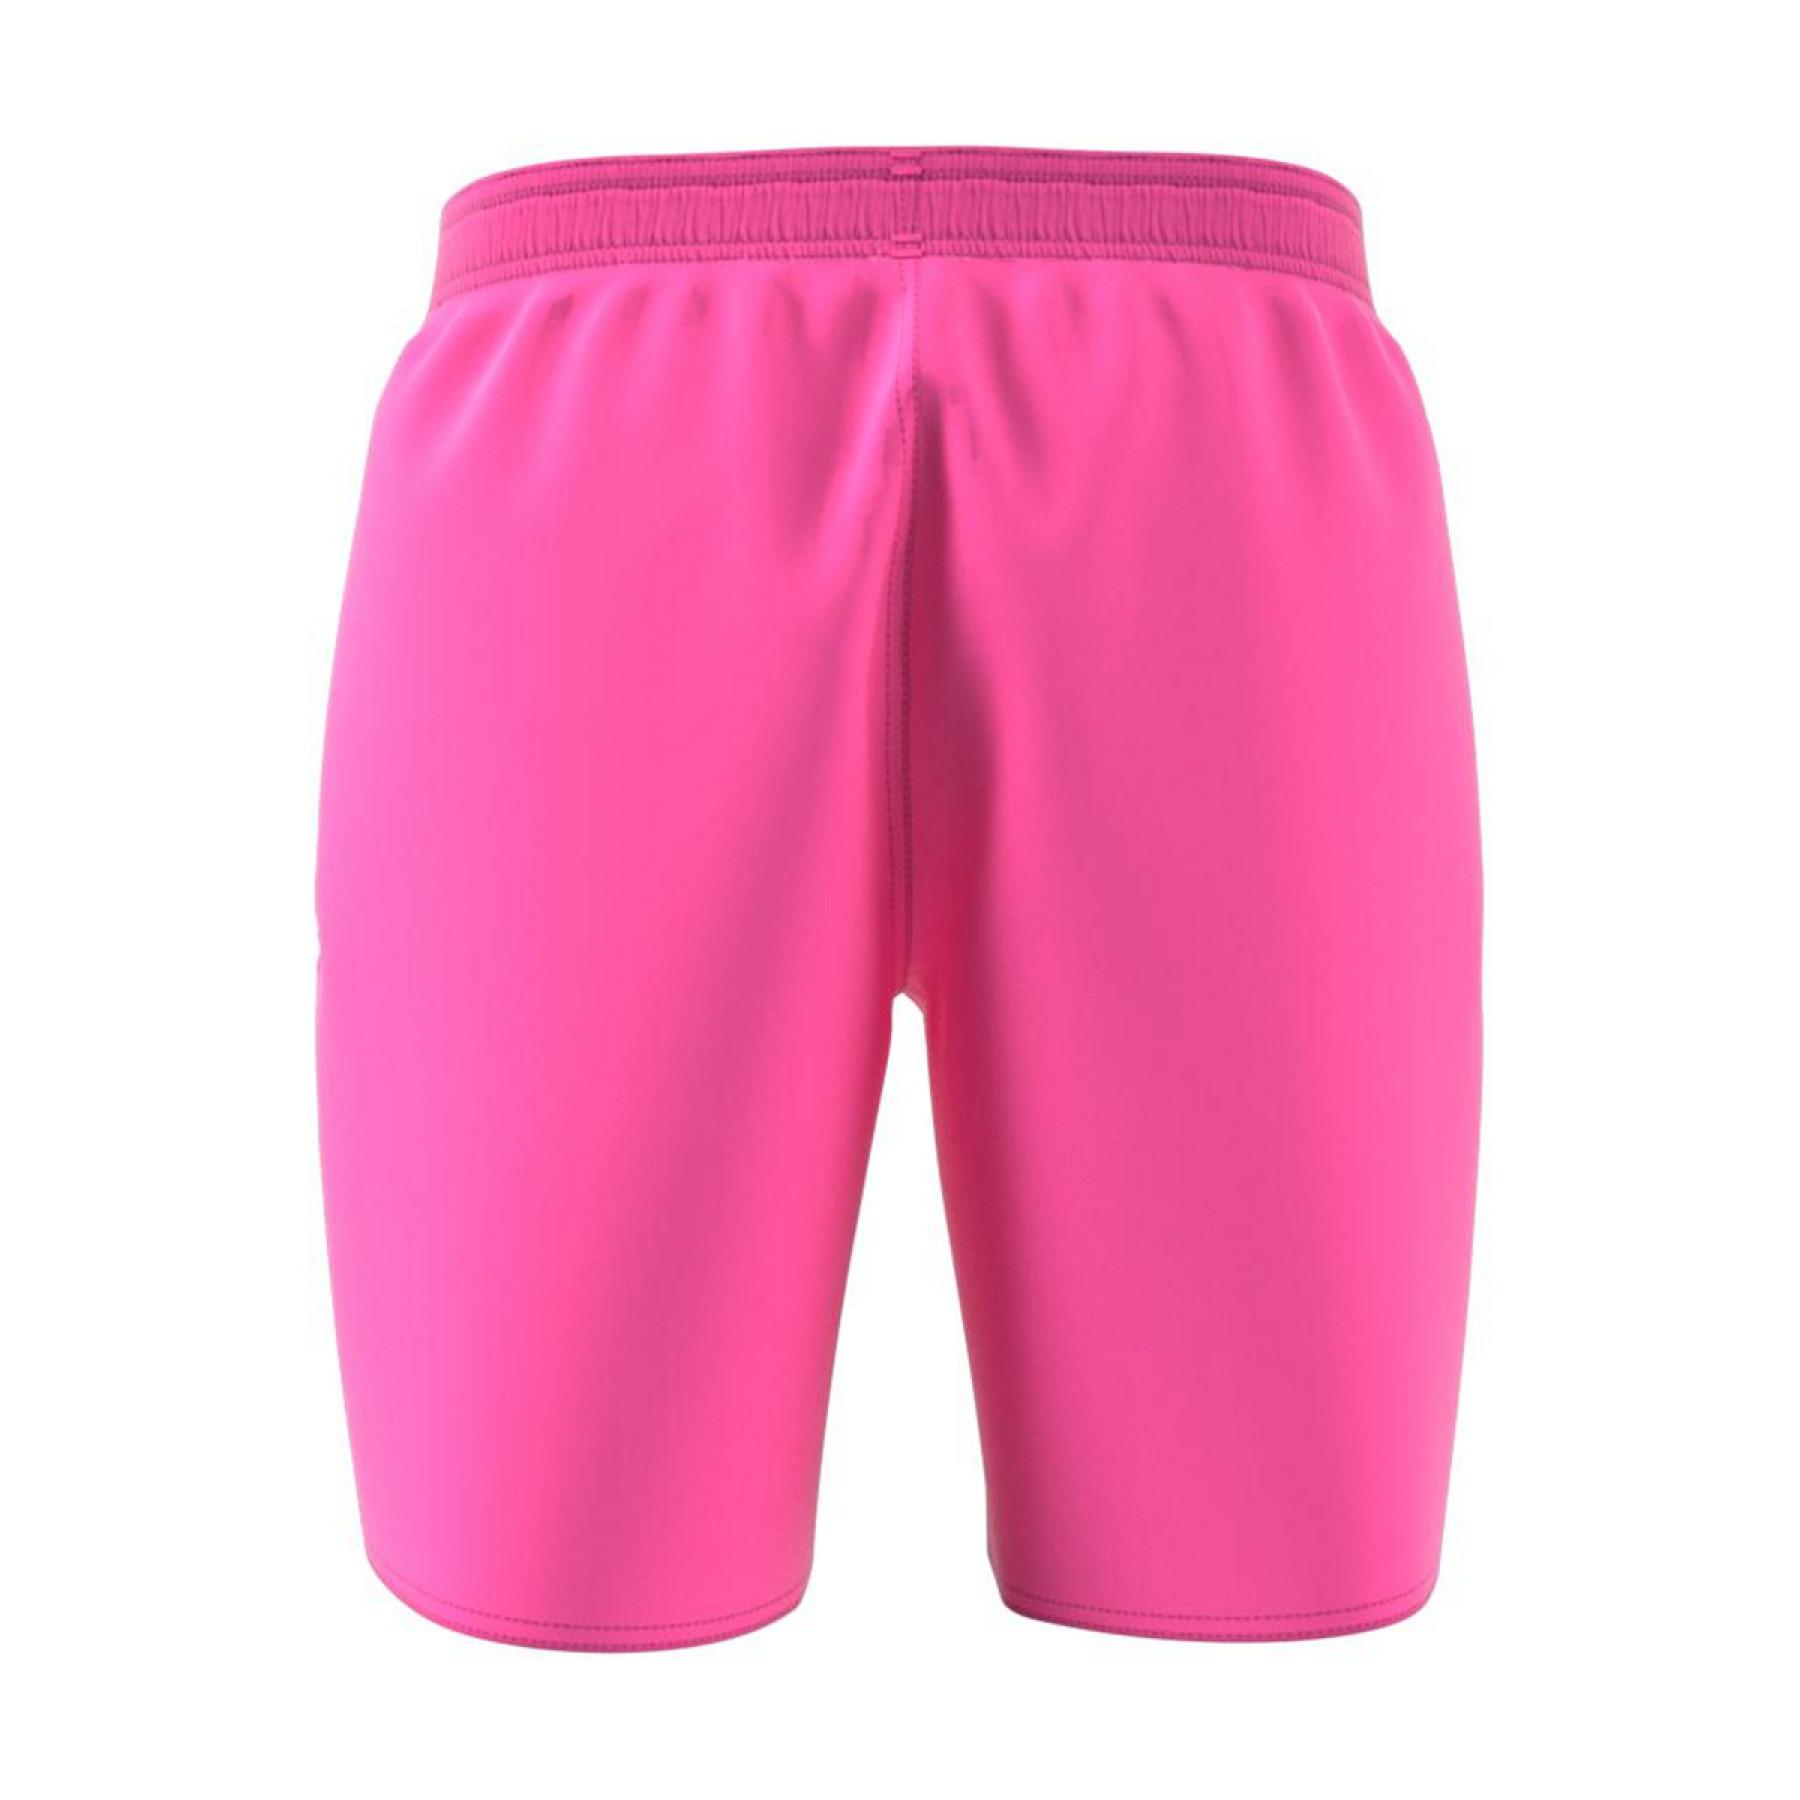 Swimming shorts adidas Classic Length Solid